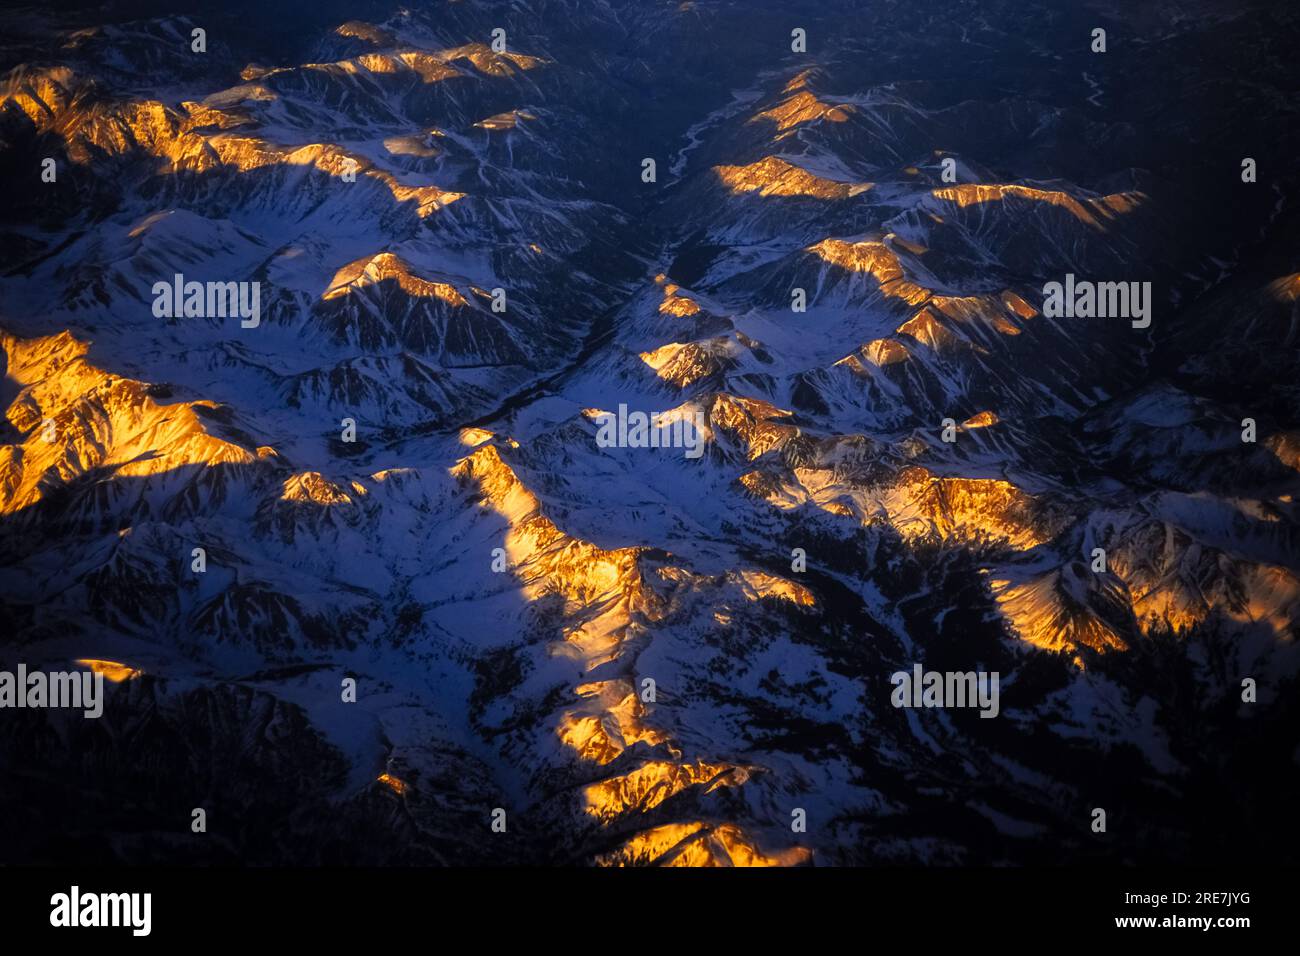 The Absaroka Mountains, part of the Continental divide on the Winter Solstice, from a United Airlines flight, Wyoming, USA. Stock Photo